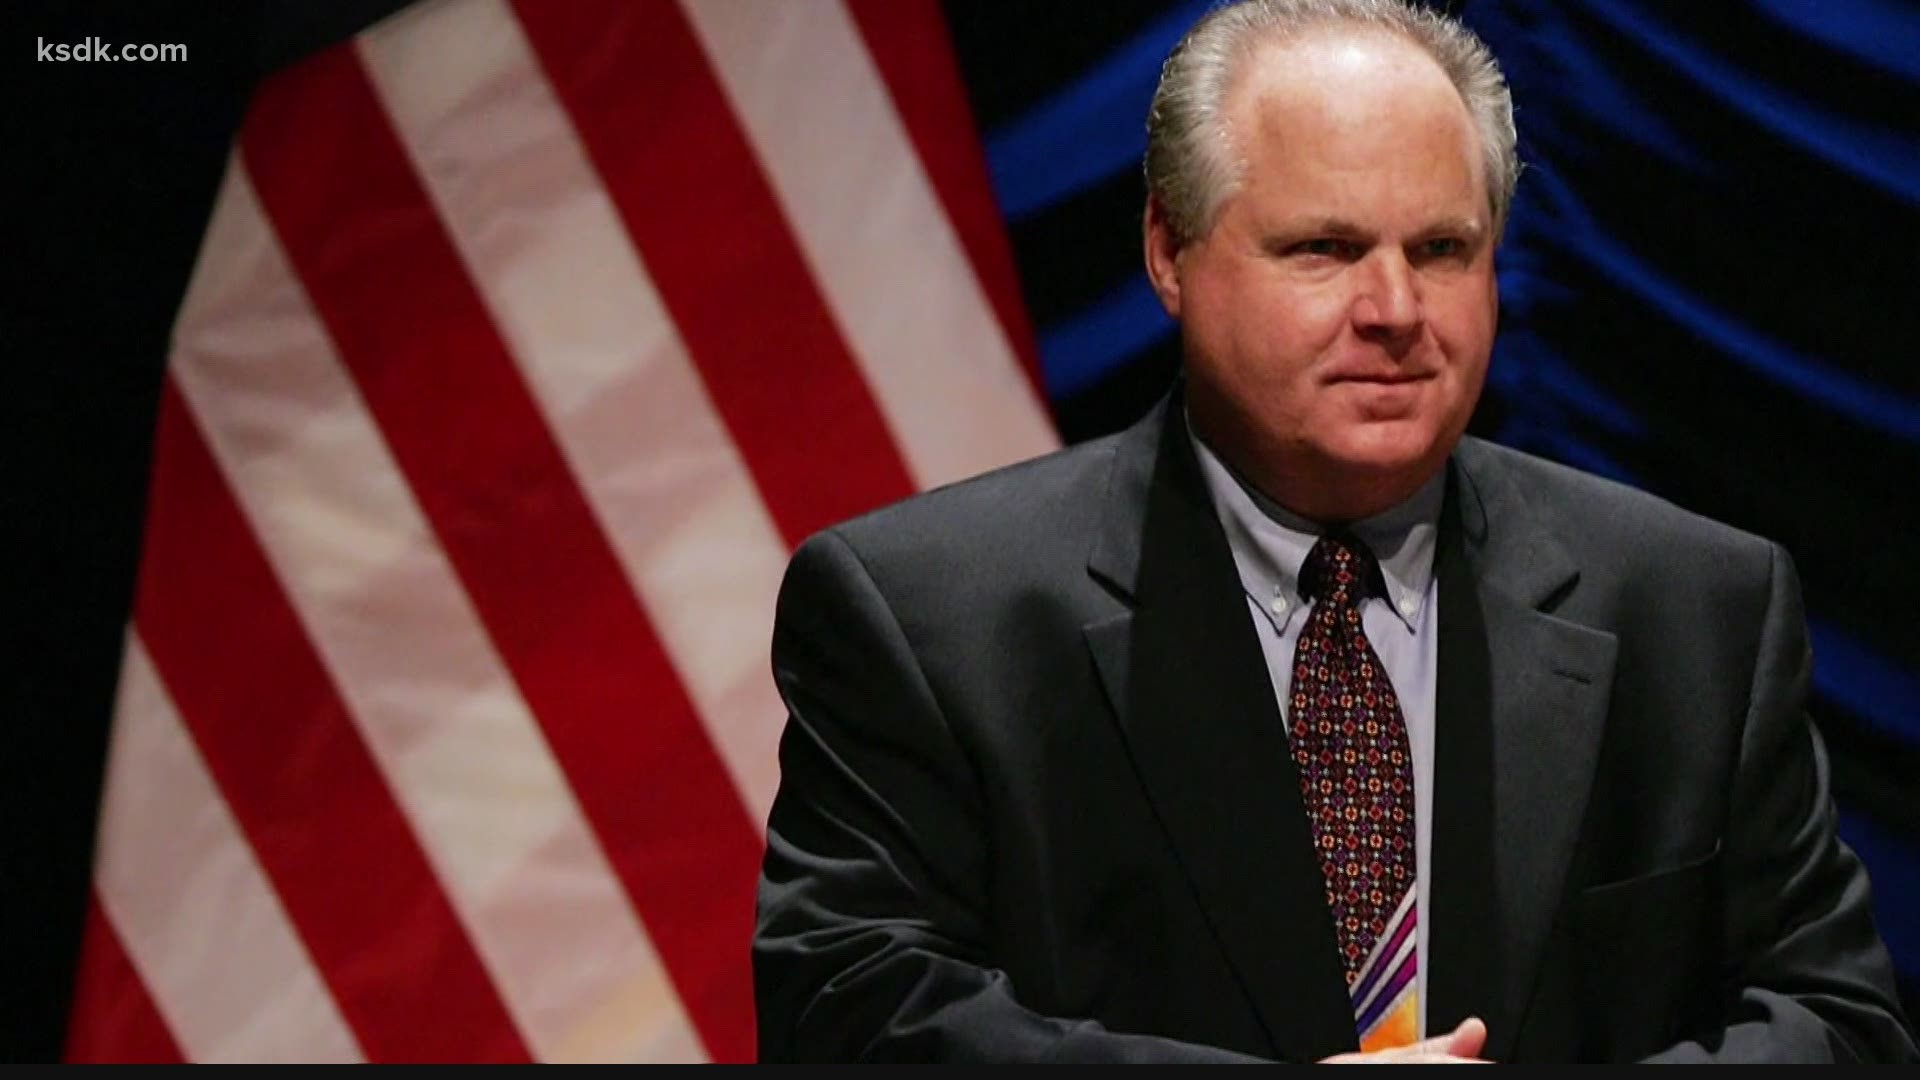 Limbaugh first announced he was diagnosed with advanced lung cancer on Feb. 3, 2020. The following day Trump awarded him the Presidential Medal of Freedom